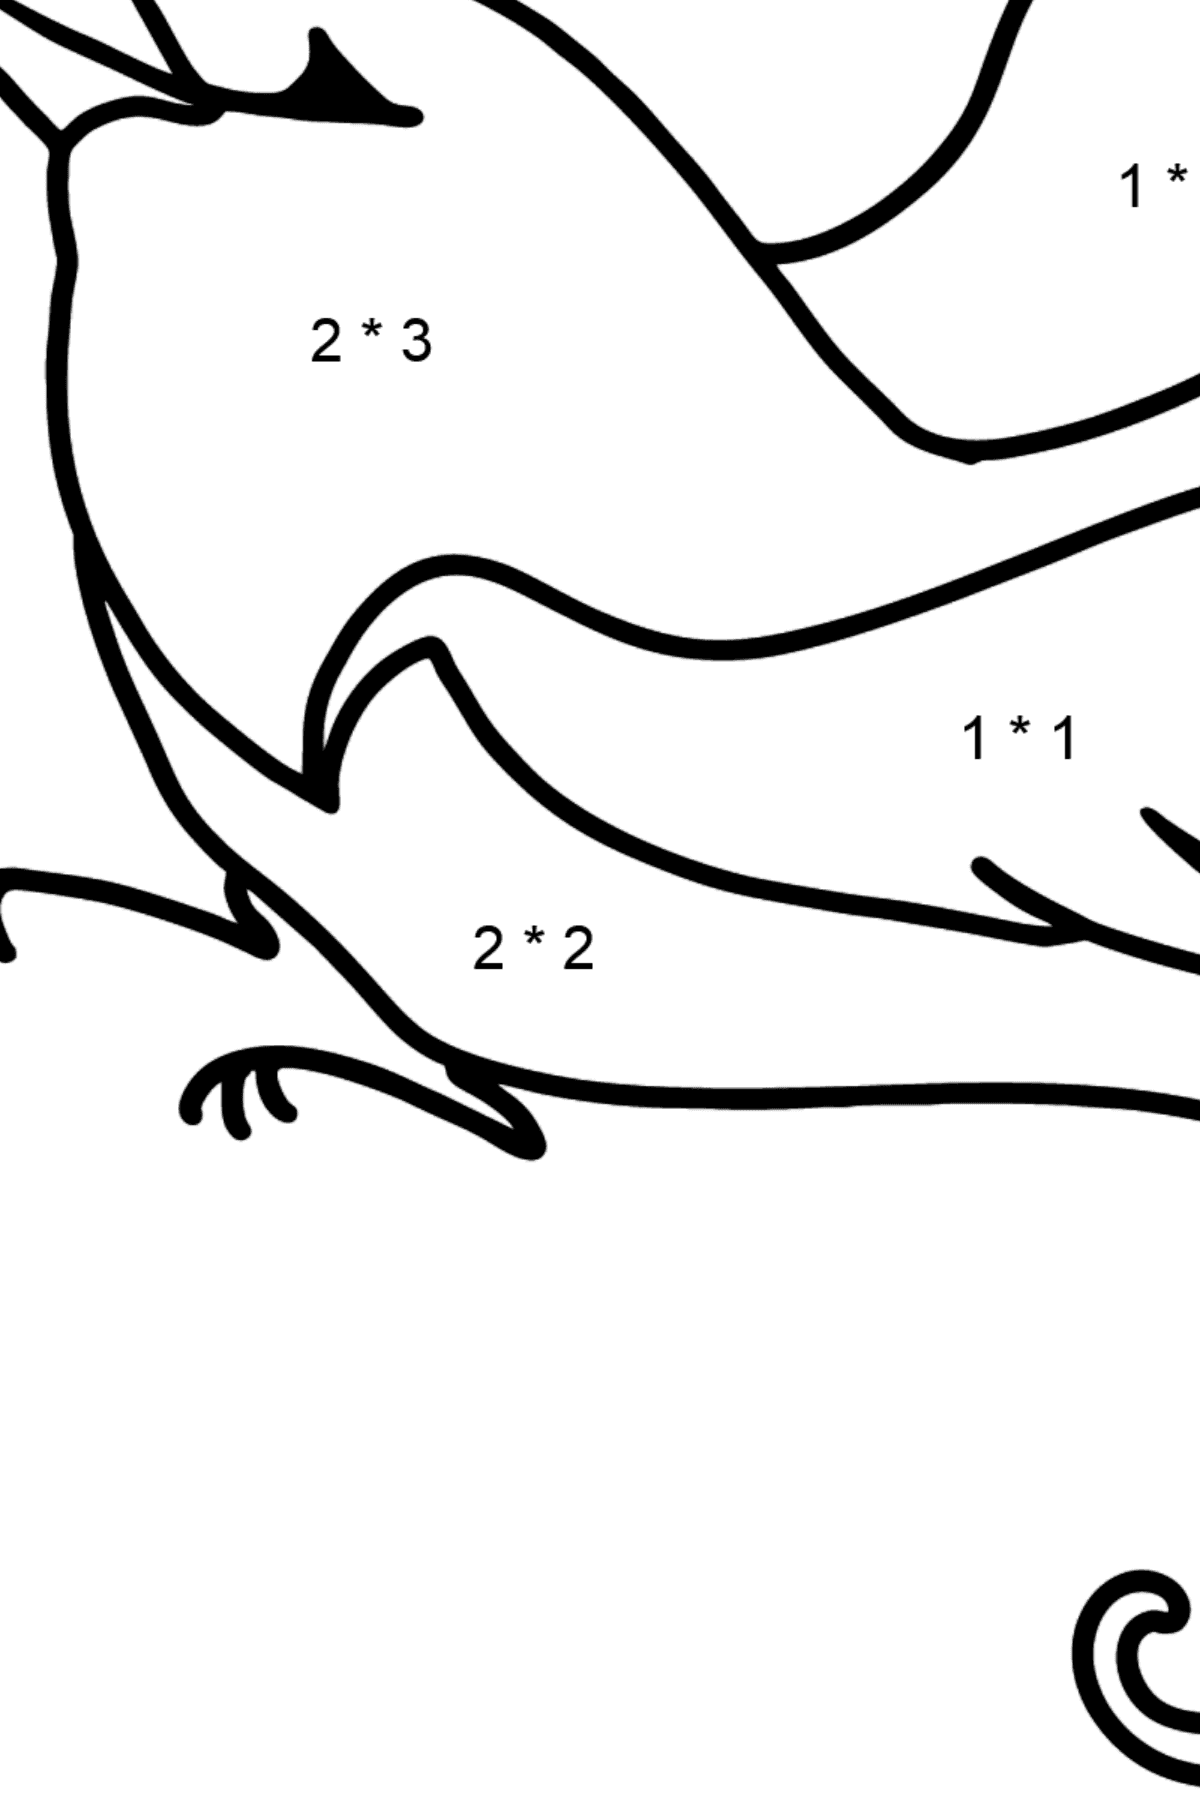 Hummingbird coloring page - Math Coloring - Multiplication for Kids